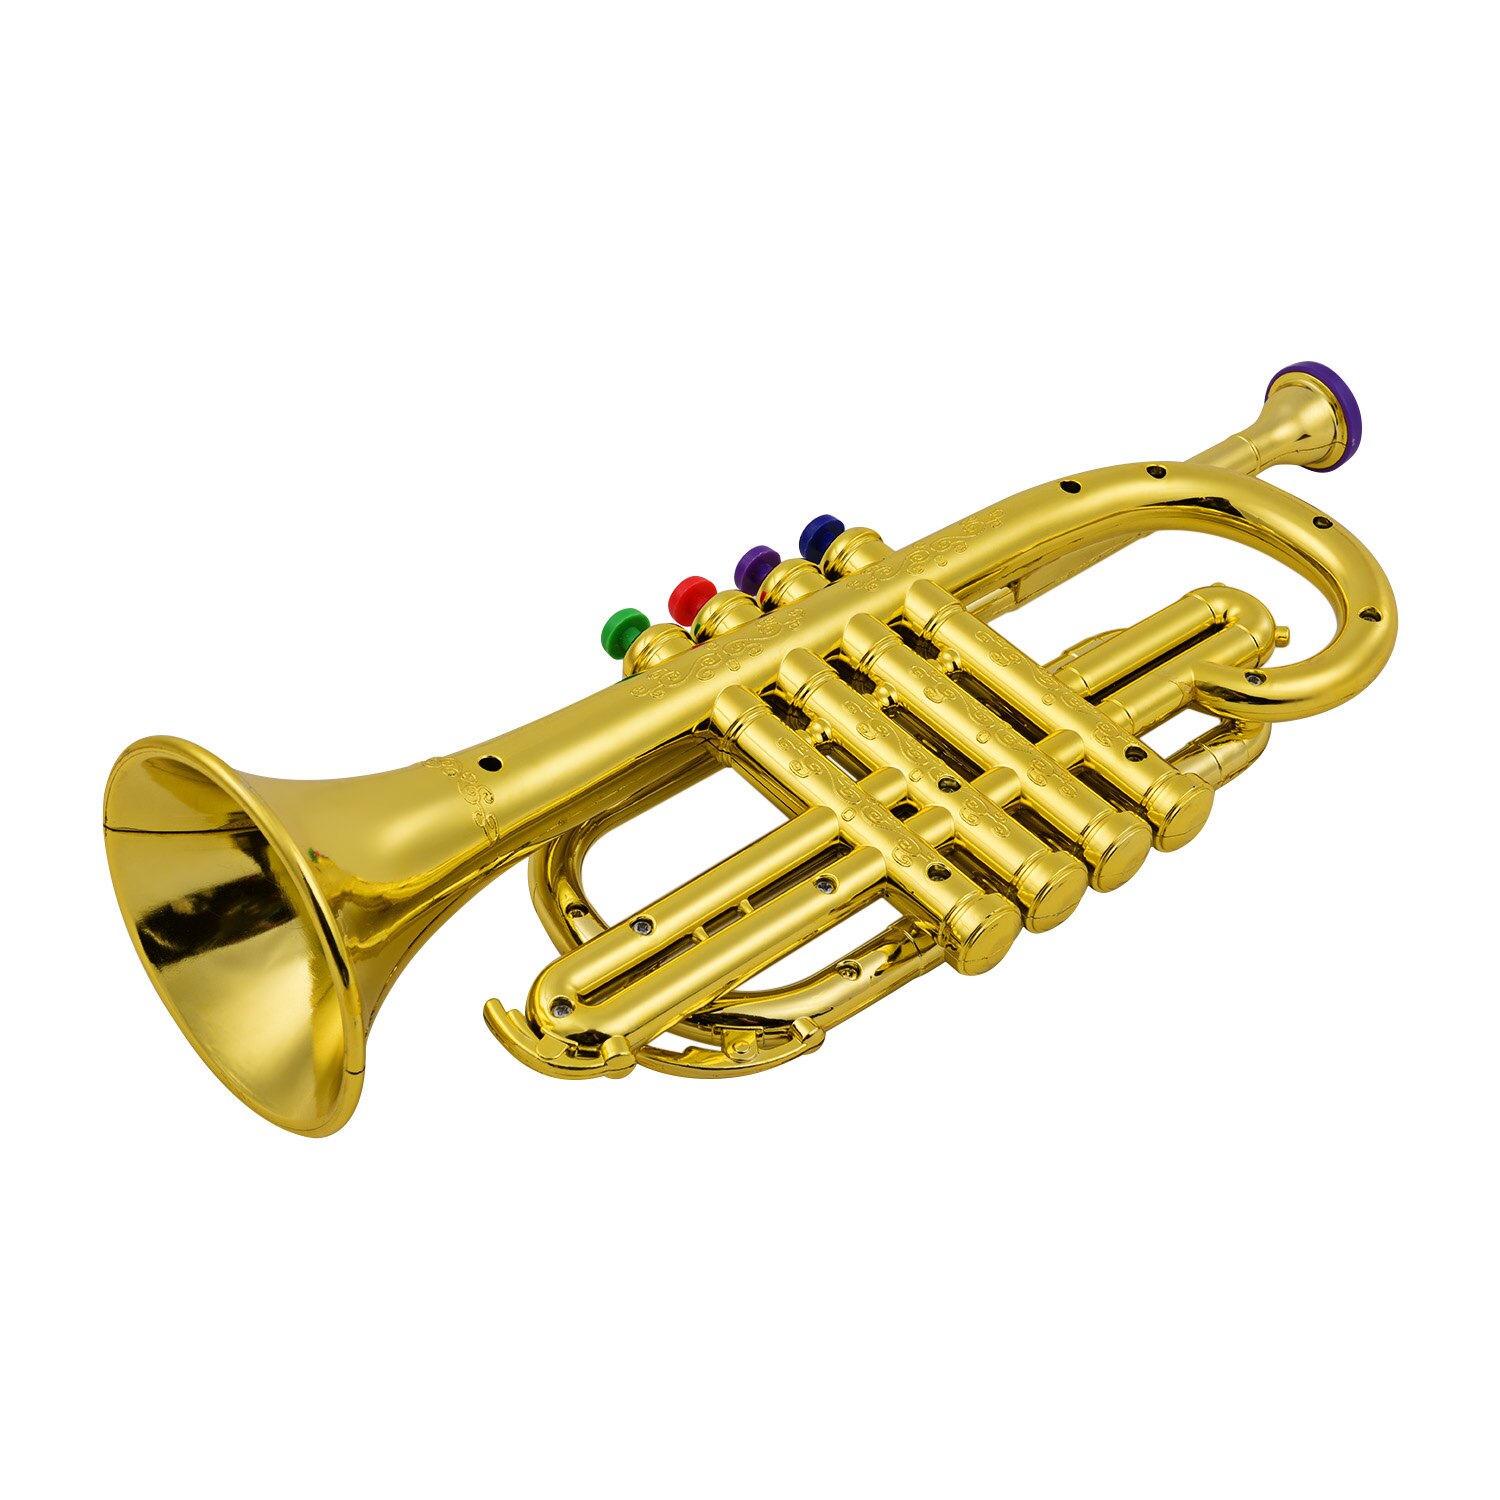 Trumpet Kids Musical Educational toy Wind Instruments ABS Metallic Gold Trumpet with 4 Colored Keys for Kids Children